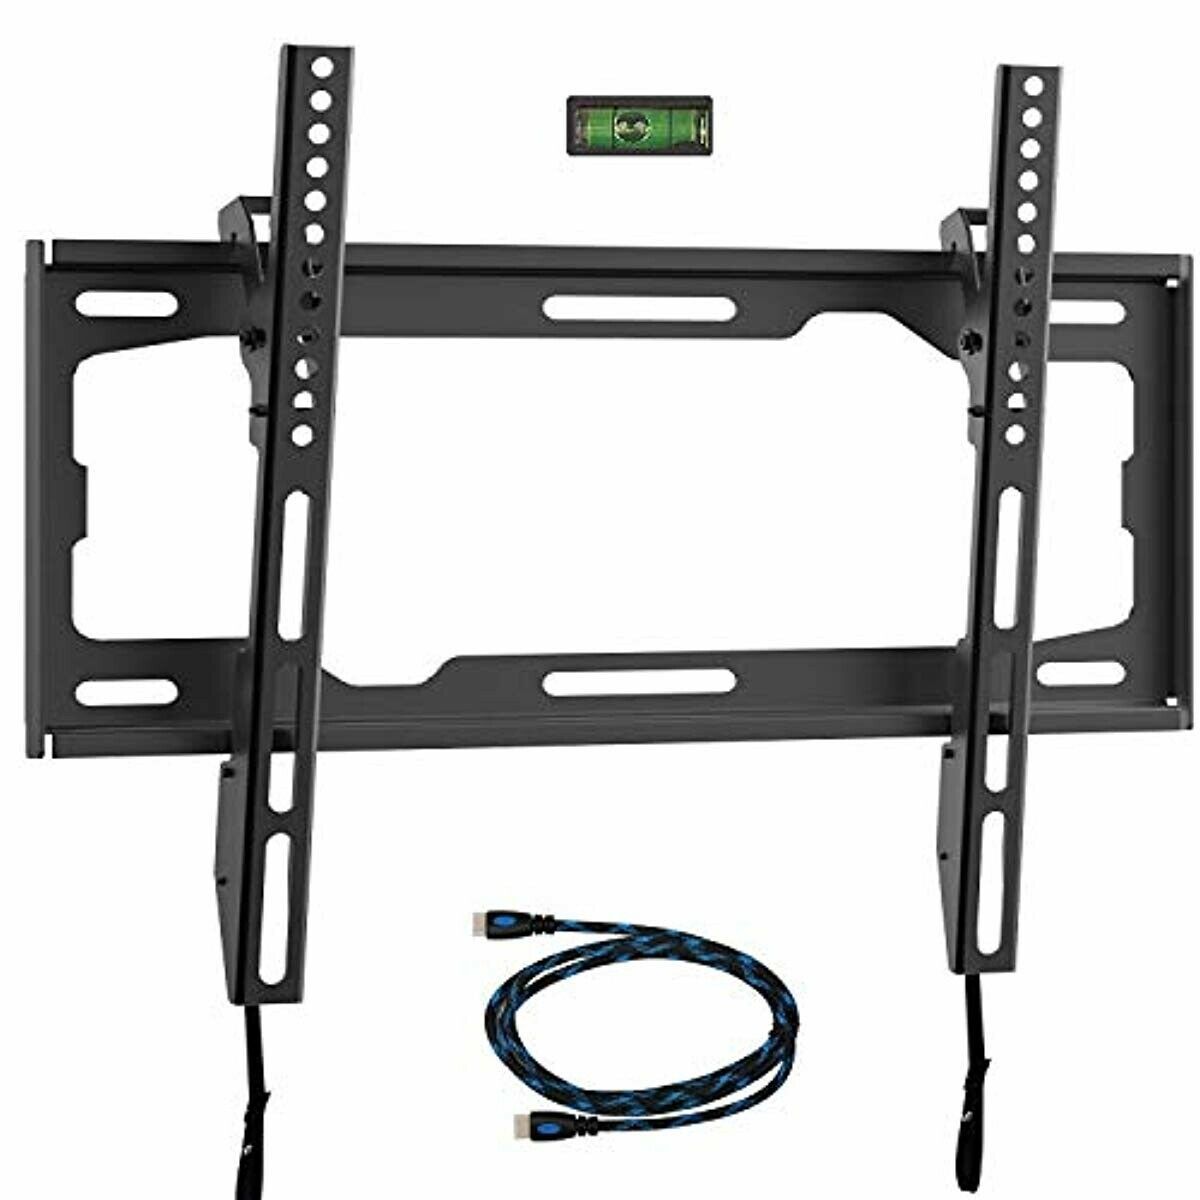 WALI Tilt TV Wall Mount Bracket for Most 26-55 inches LED, LCD, OLED Flat Screen - $17.99